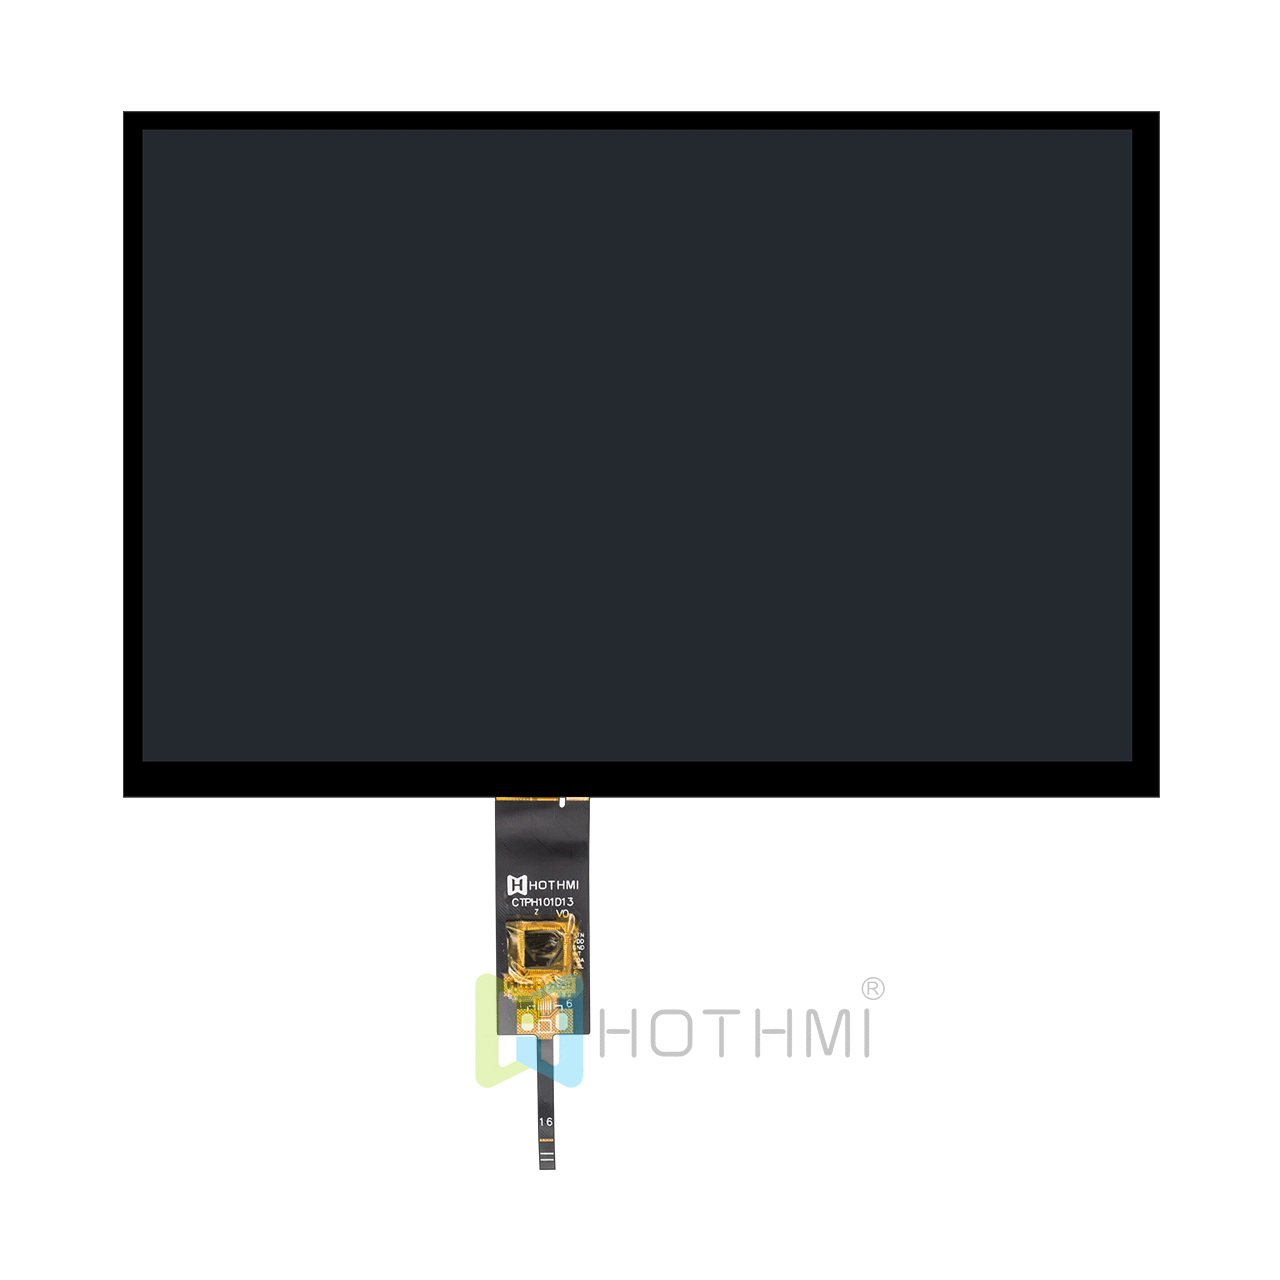 10.1 inch TFT LCD display Capacitive touch screen 1280x800 dot matrix LVDS interface IPS full viewing angle Sunlight readable Compatible with Linux/industrial control motherboard